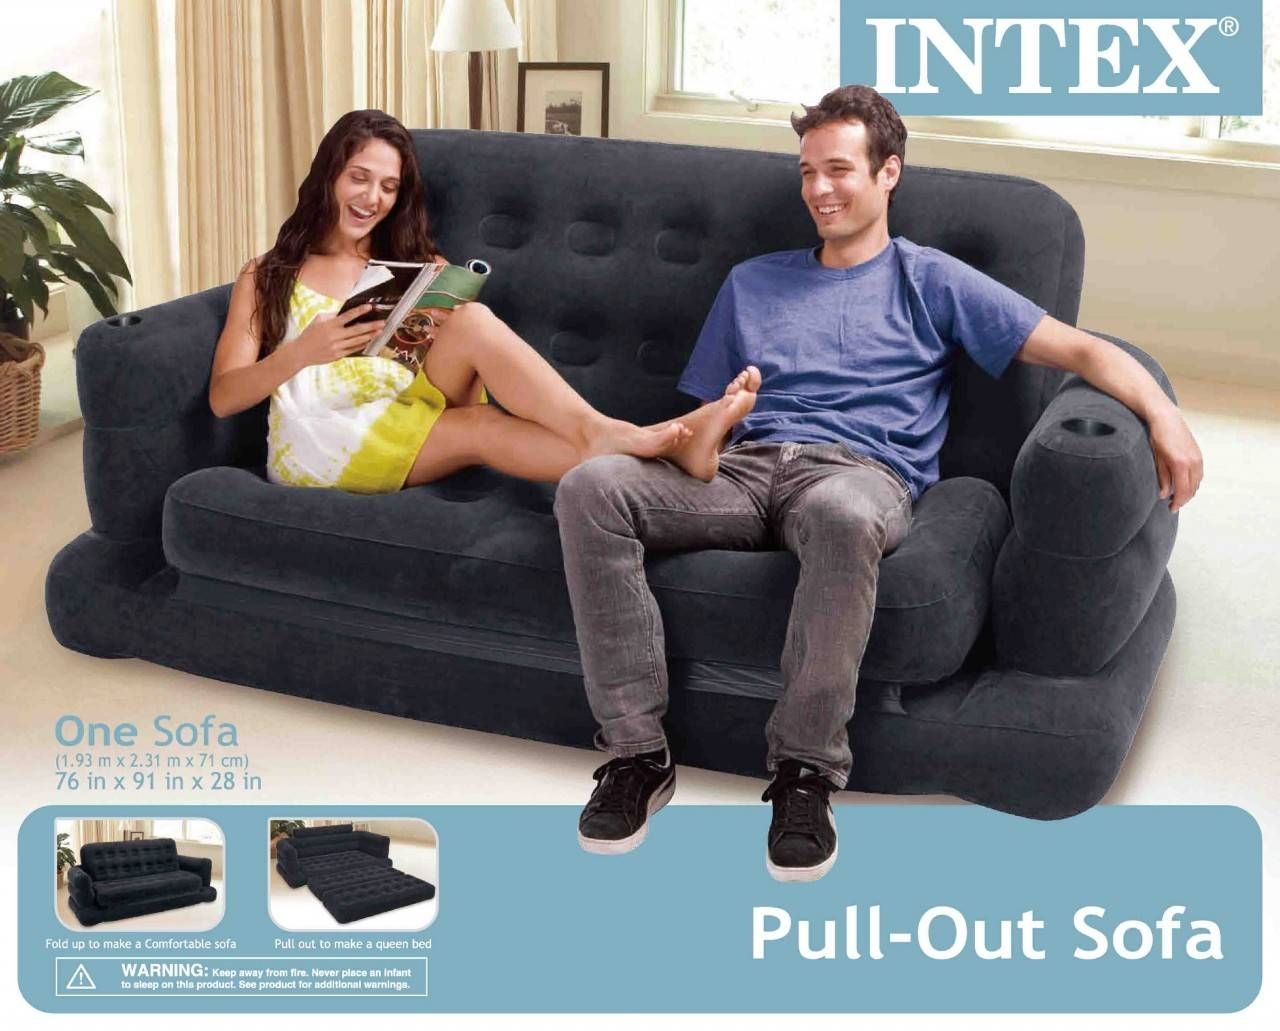 Intex Inflatable Pull Out Sofa And Queen Air Mattress Within Inflatable Pull Out Sofas (View 5 of 15)